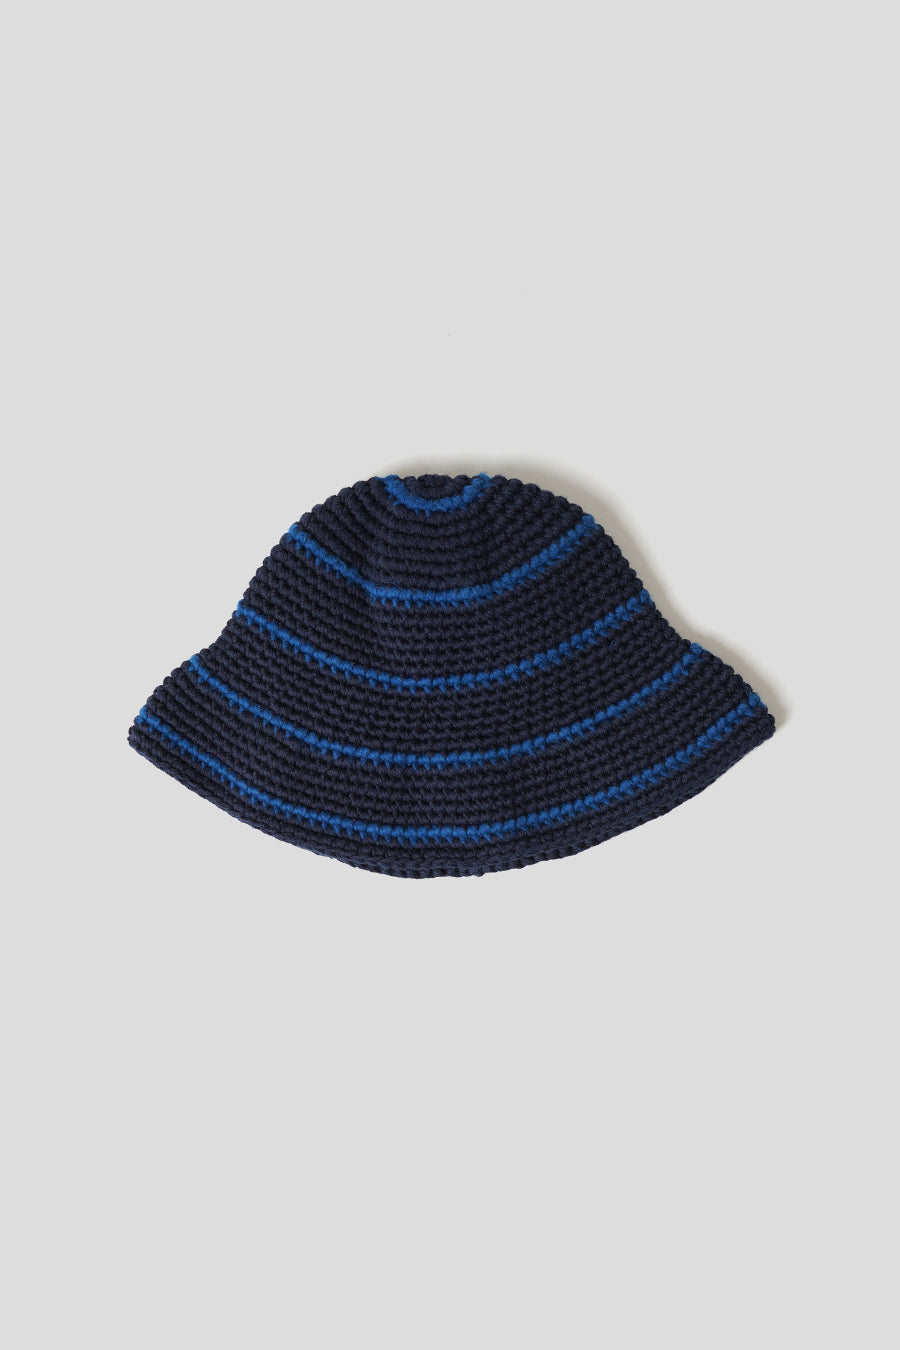 Our Legacy - BLUE AND NAVY TOM TOM BUCKET HAT - LE LABO STORE